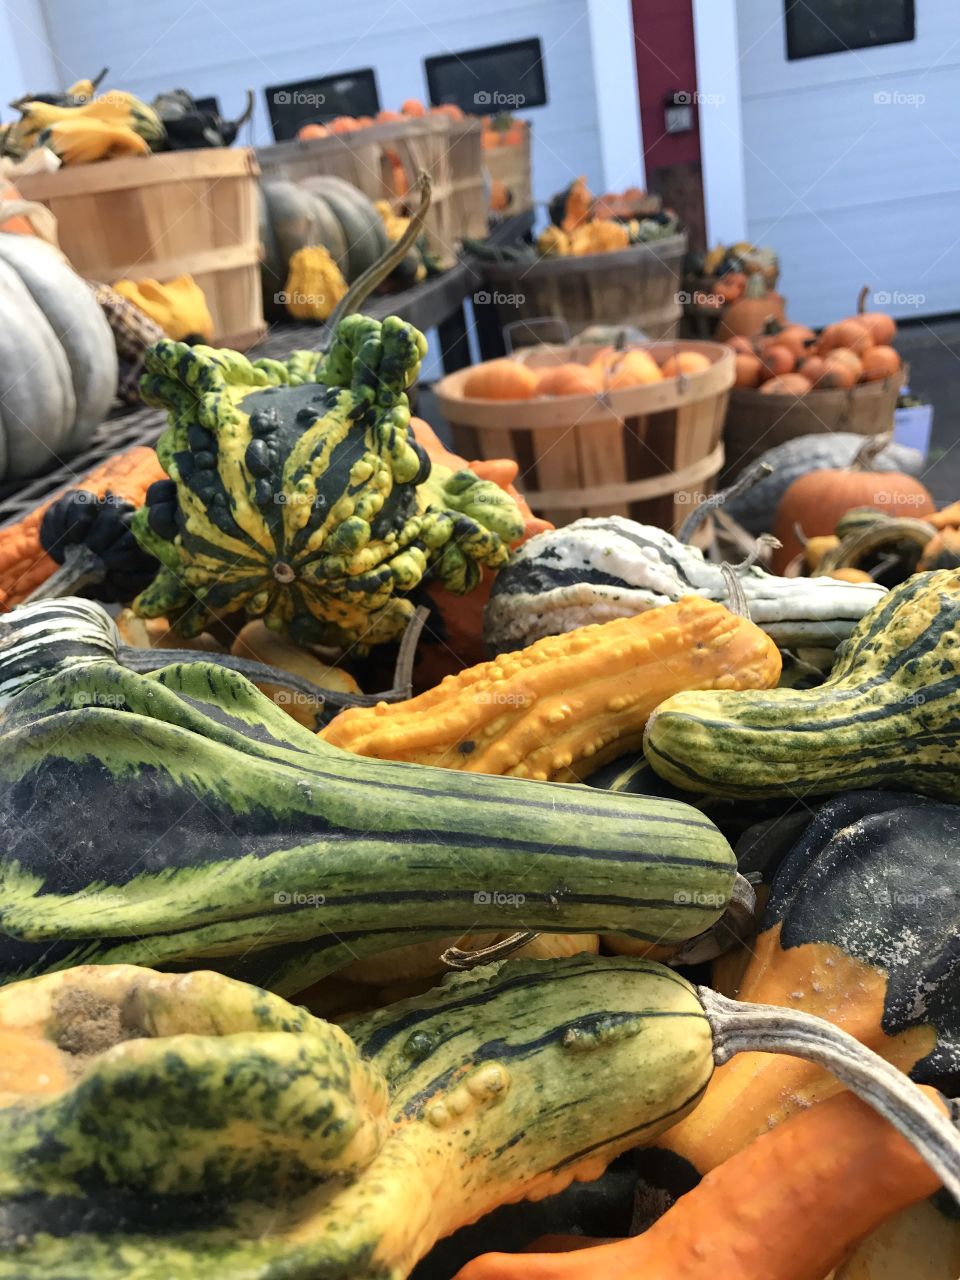 Harvest fall festivals with orange and green vegetables!